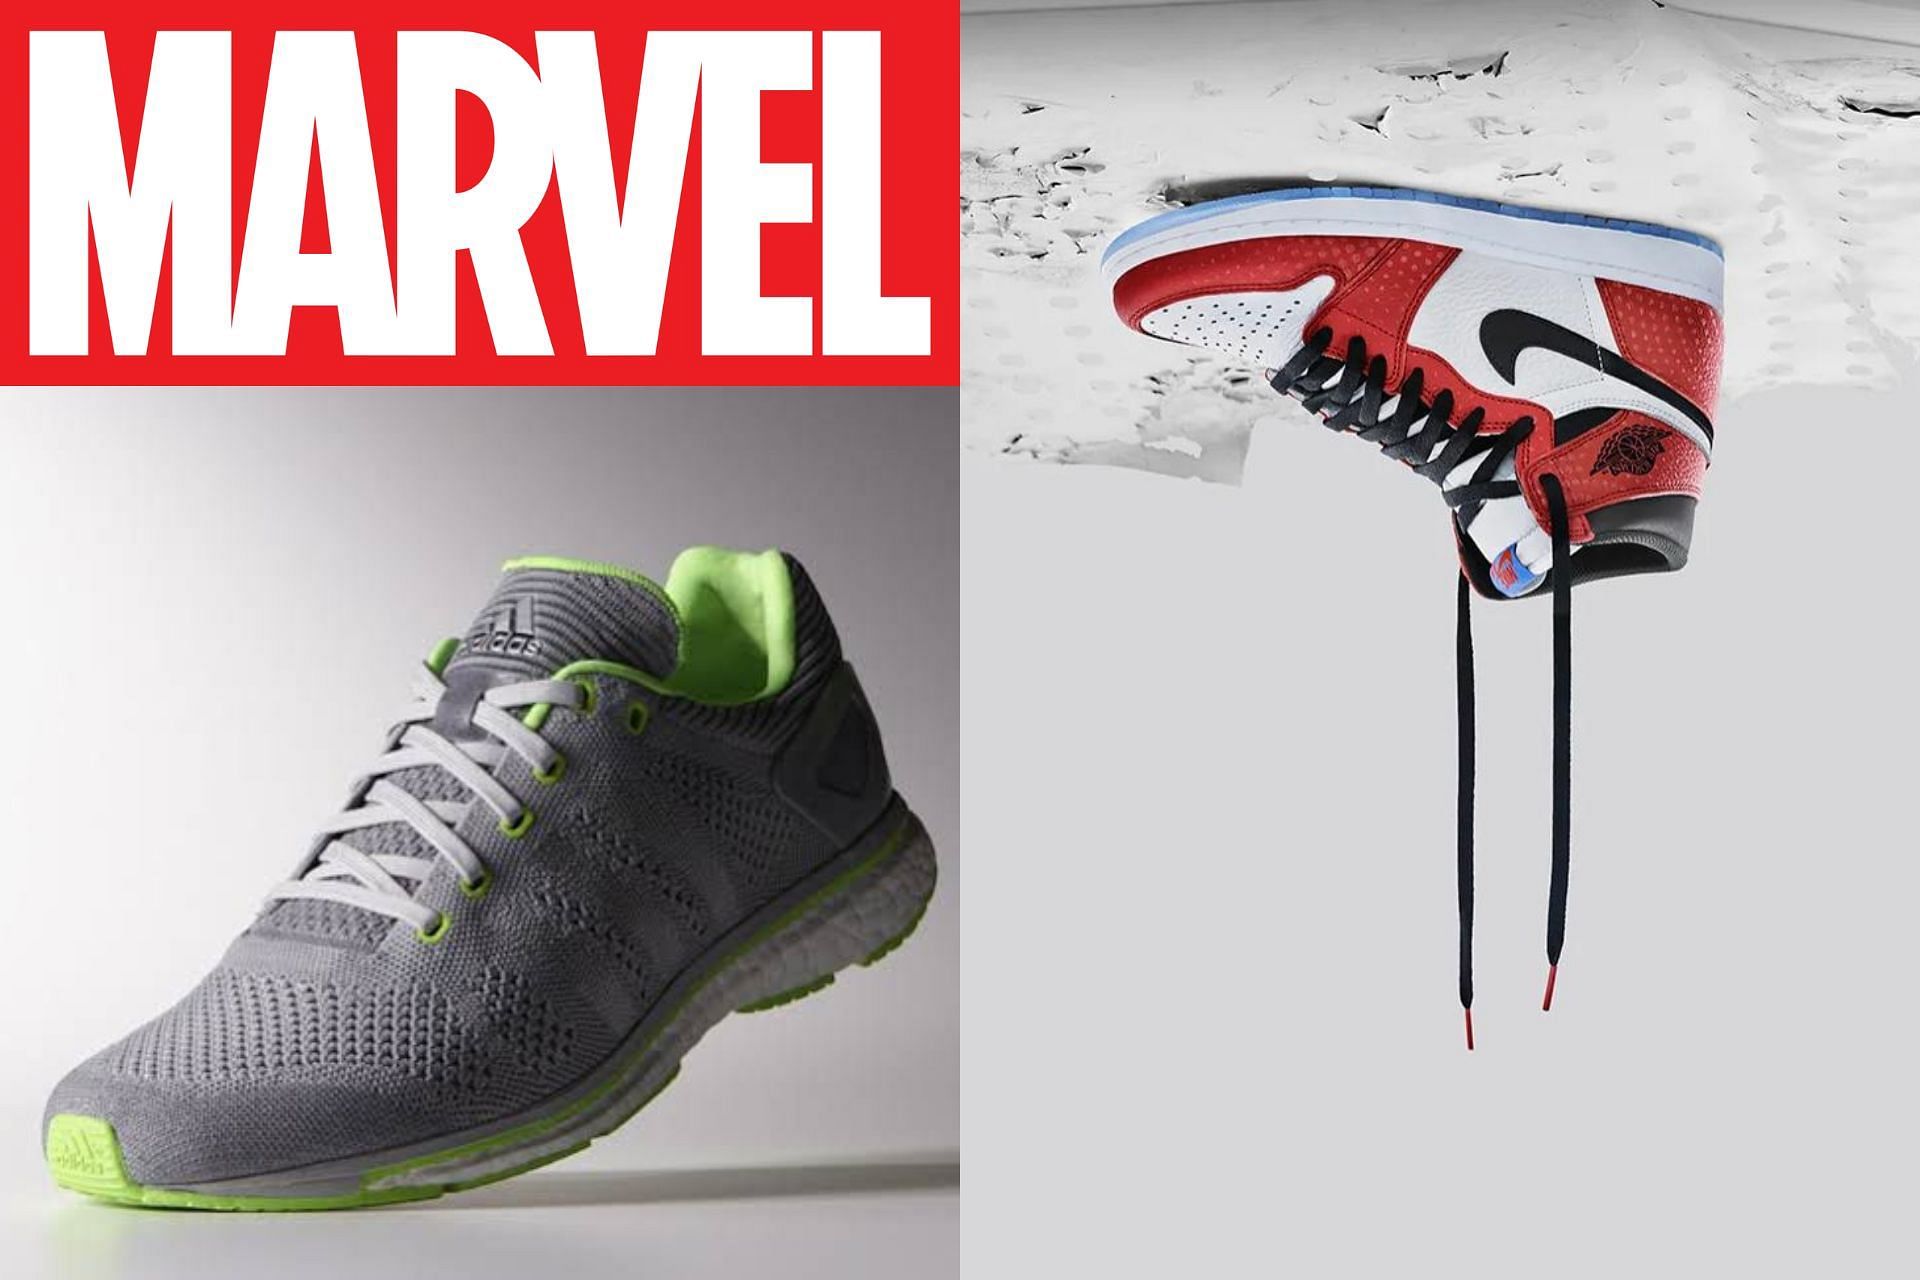 Best five sneaker collabs by Marvel that thrilled the world over the years (Image via Sportskeeda)